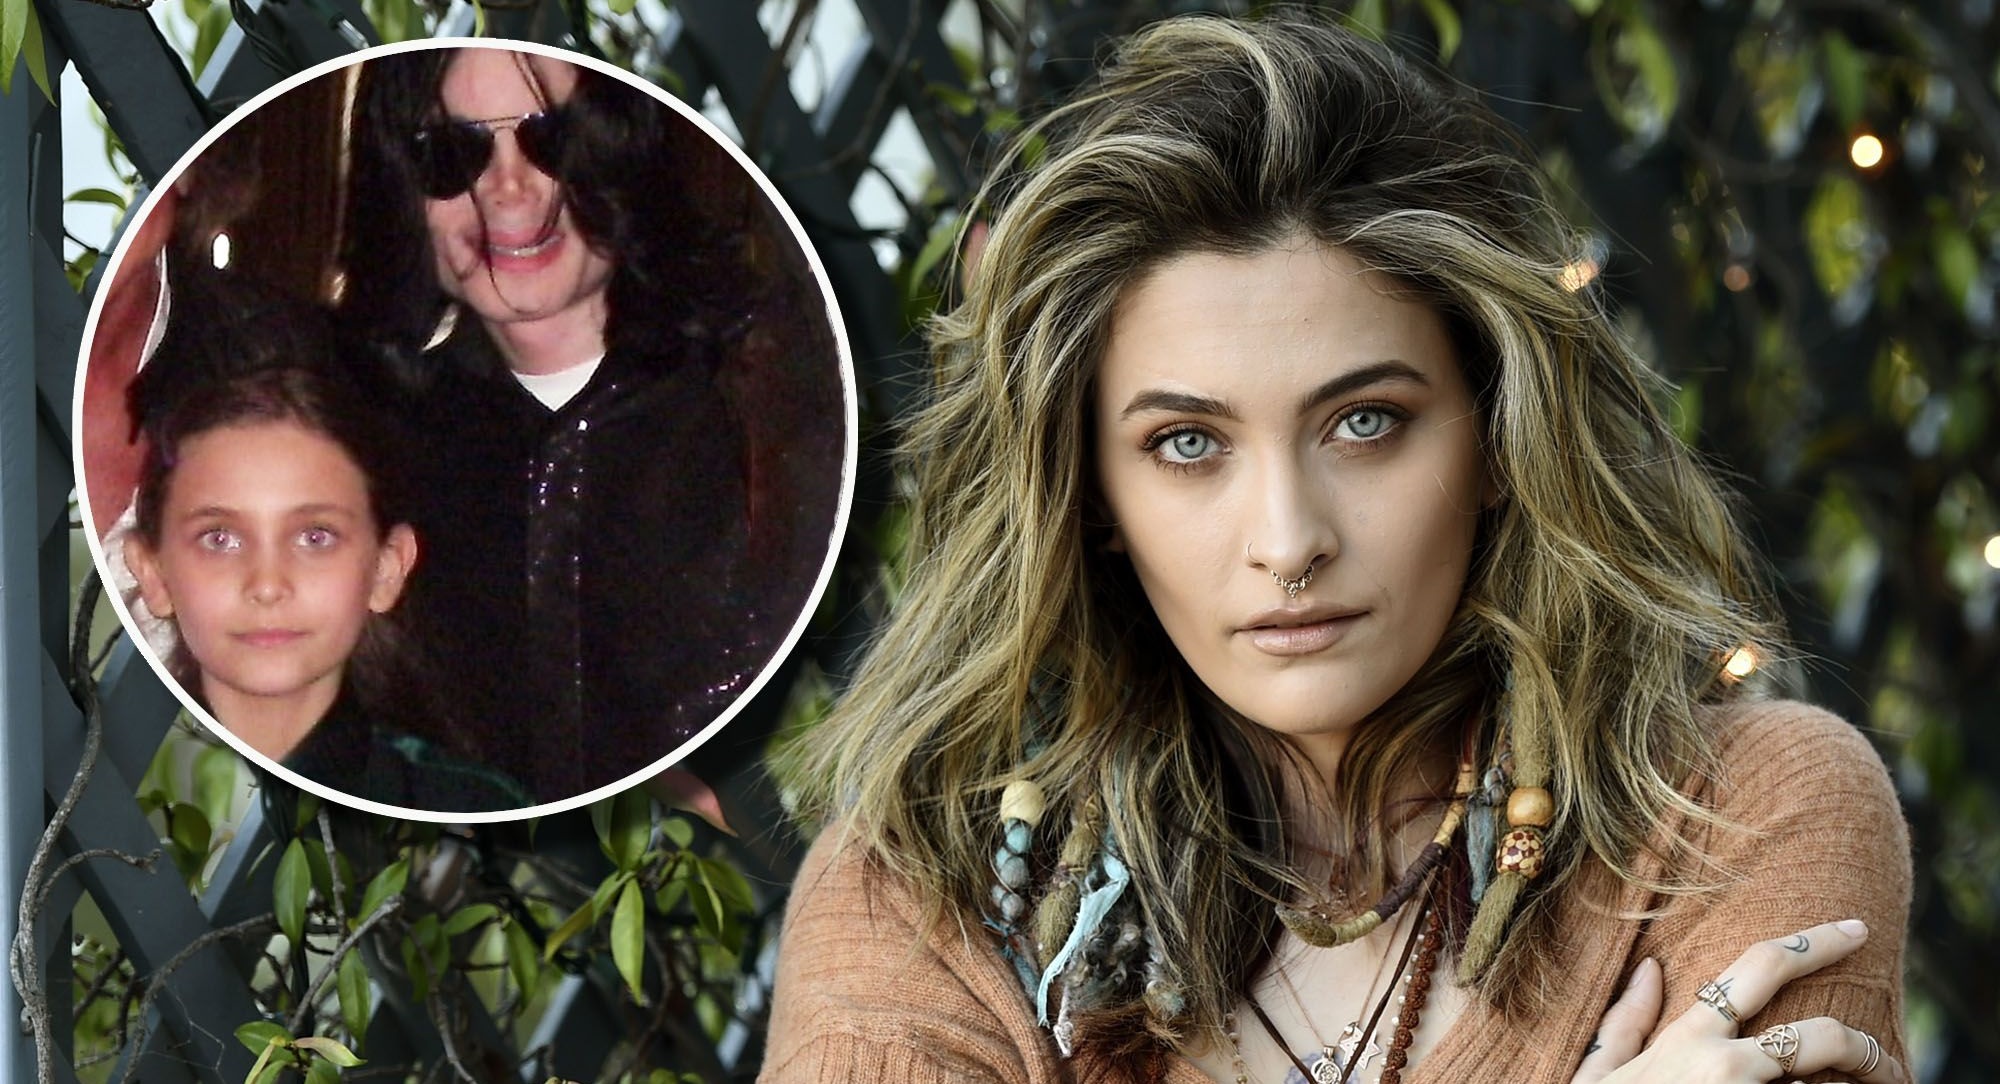 Michael Jackson’s Daughter Paris To Act In American Horror Story In Pivotal Role